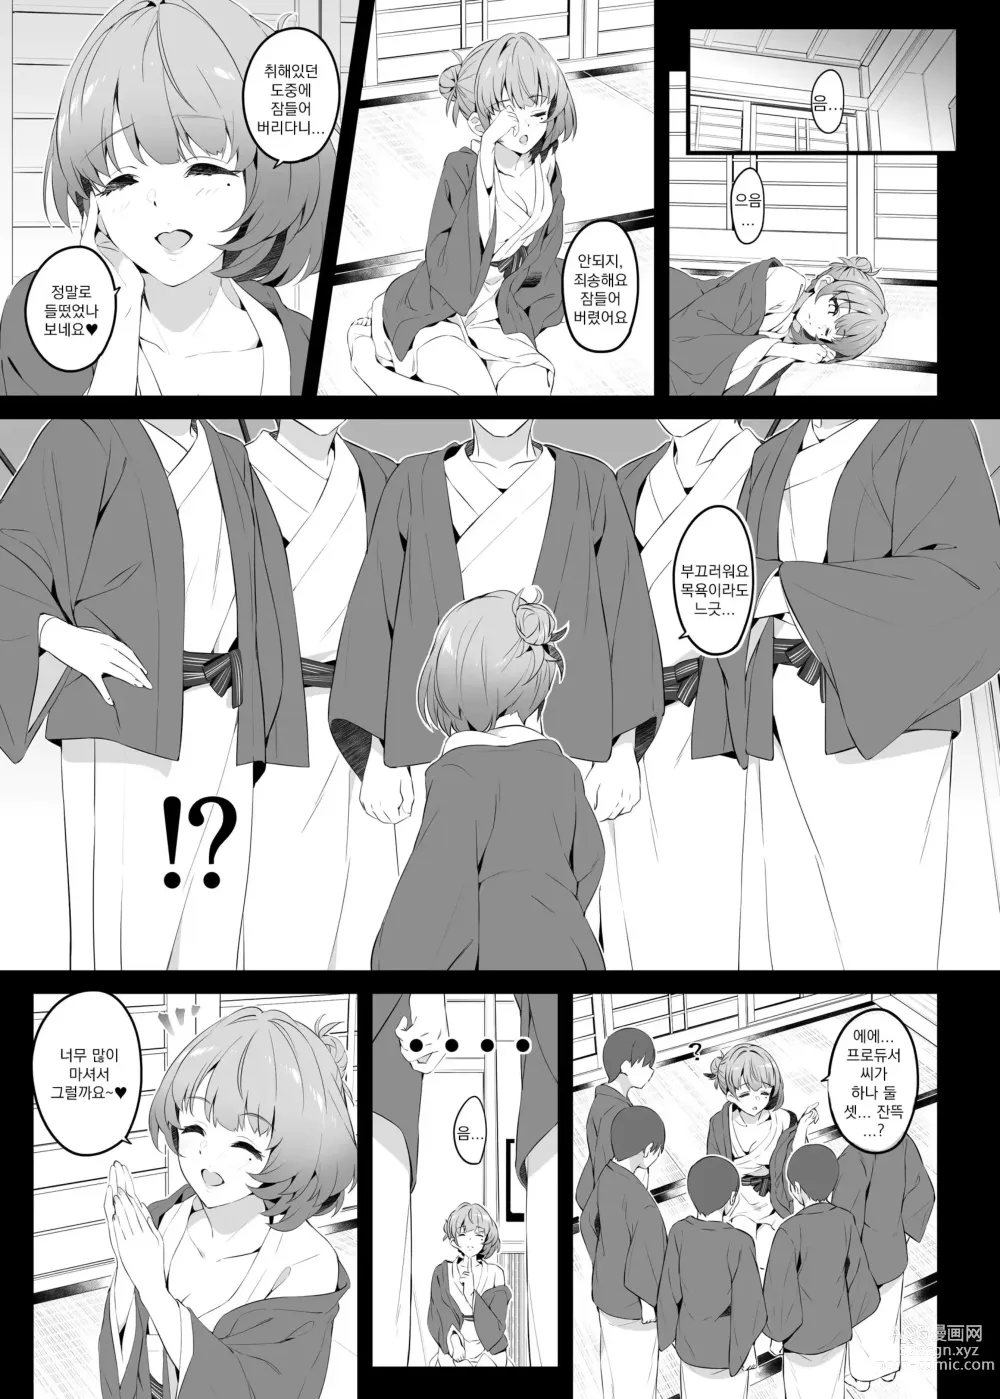 Page 9 of doujinshi Flowers blooming at night and the kings in the dream.